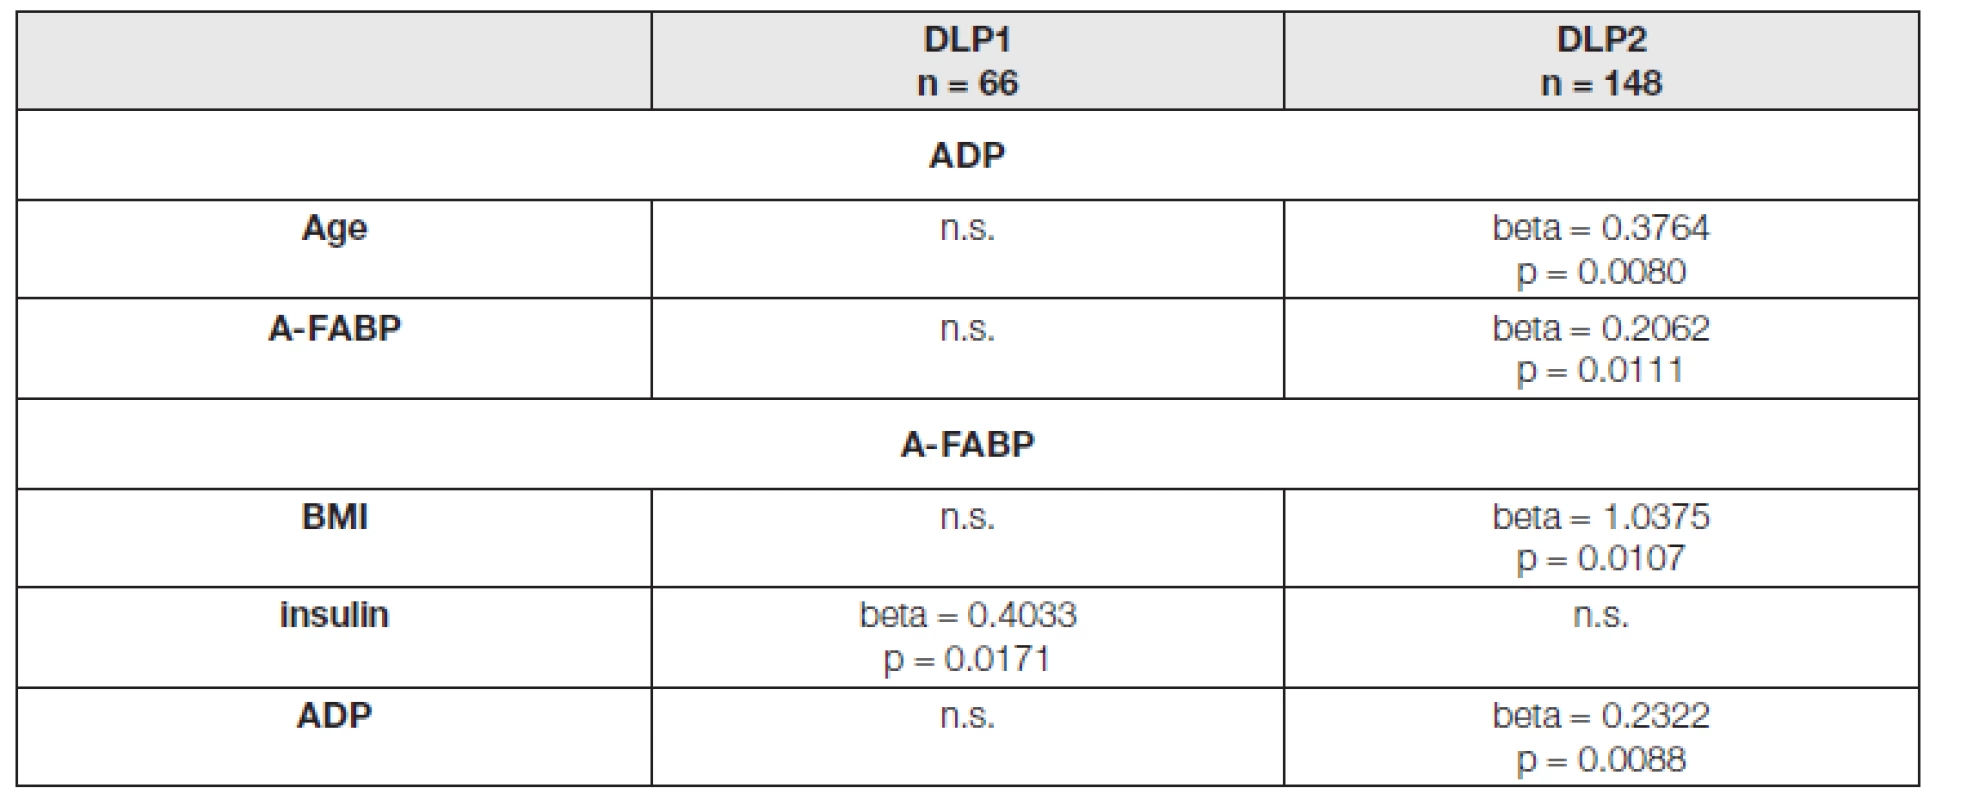 Association of adiponectin and A-FABP with correlated parameters in DLP1 and DLP2 groups. Multiple regression analysis with ADP and A-FABP as dependent variables (beta and p values).